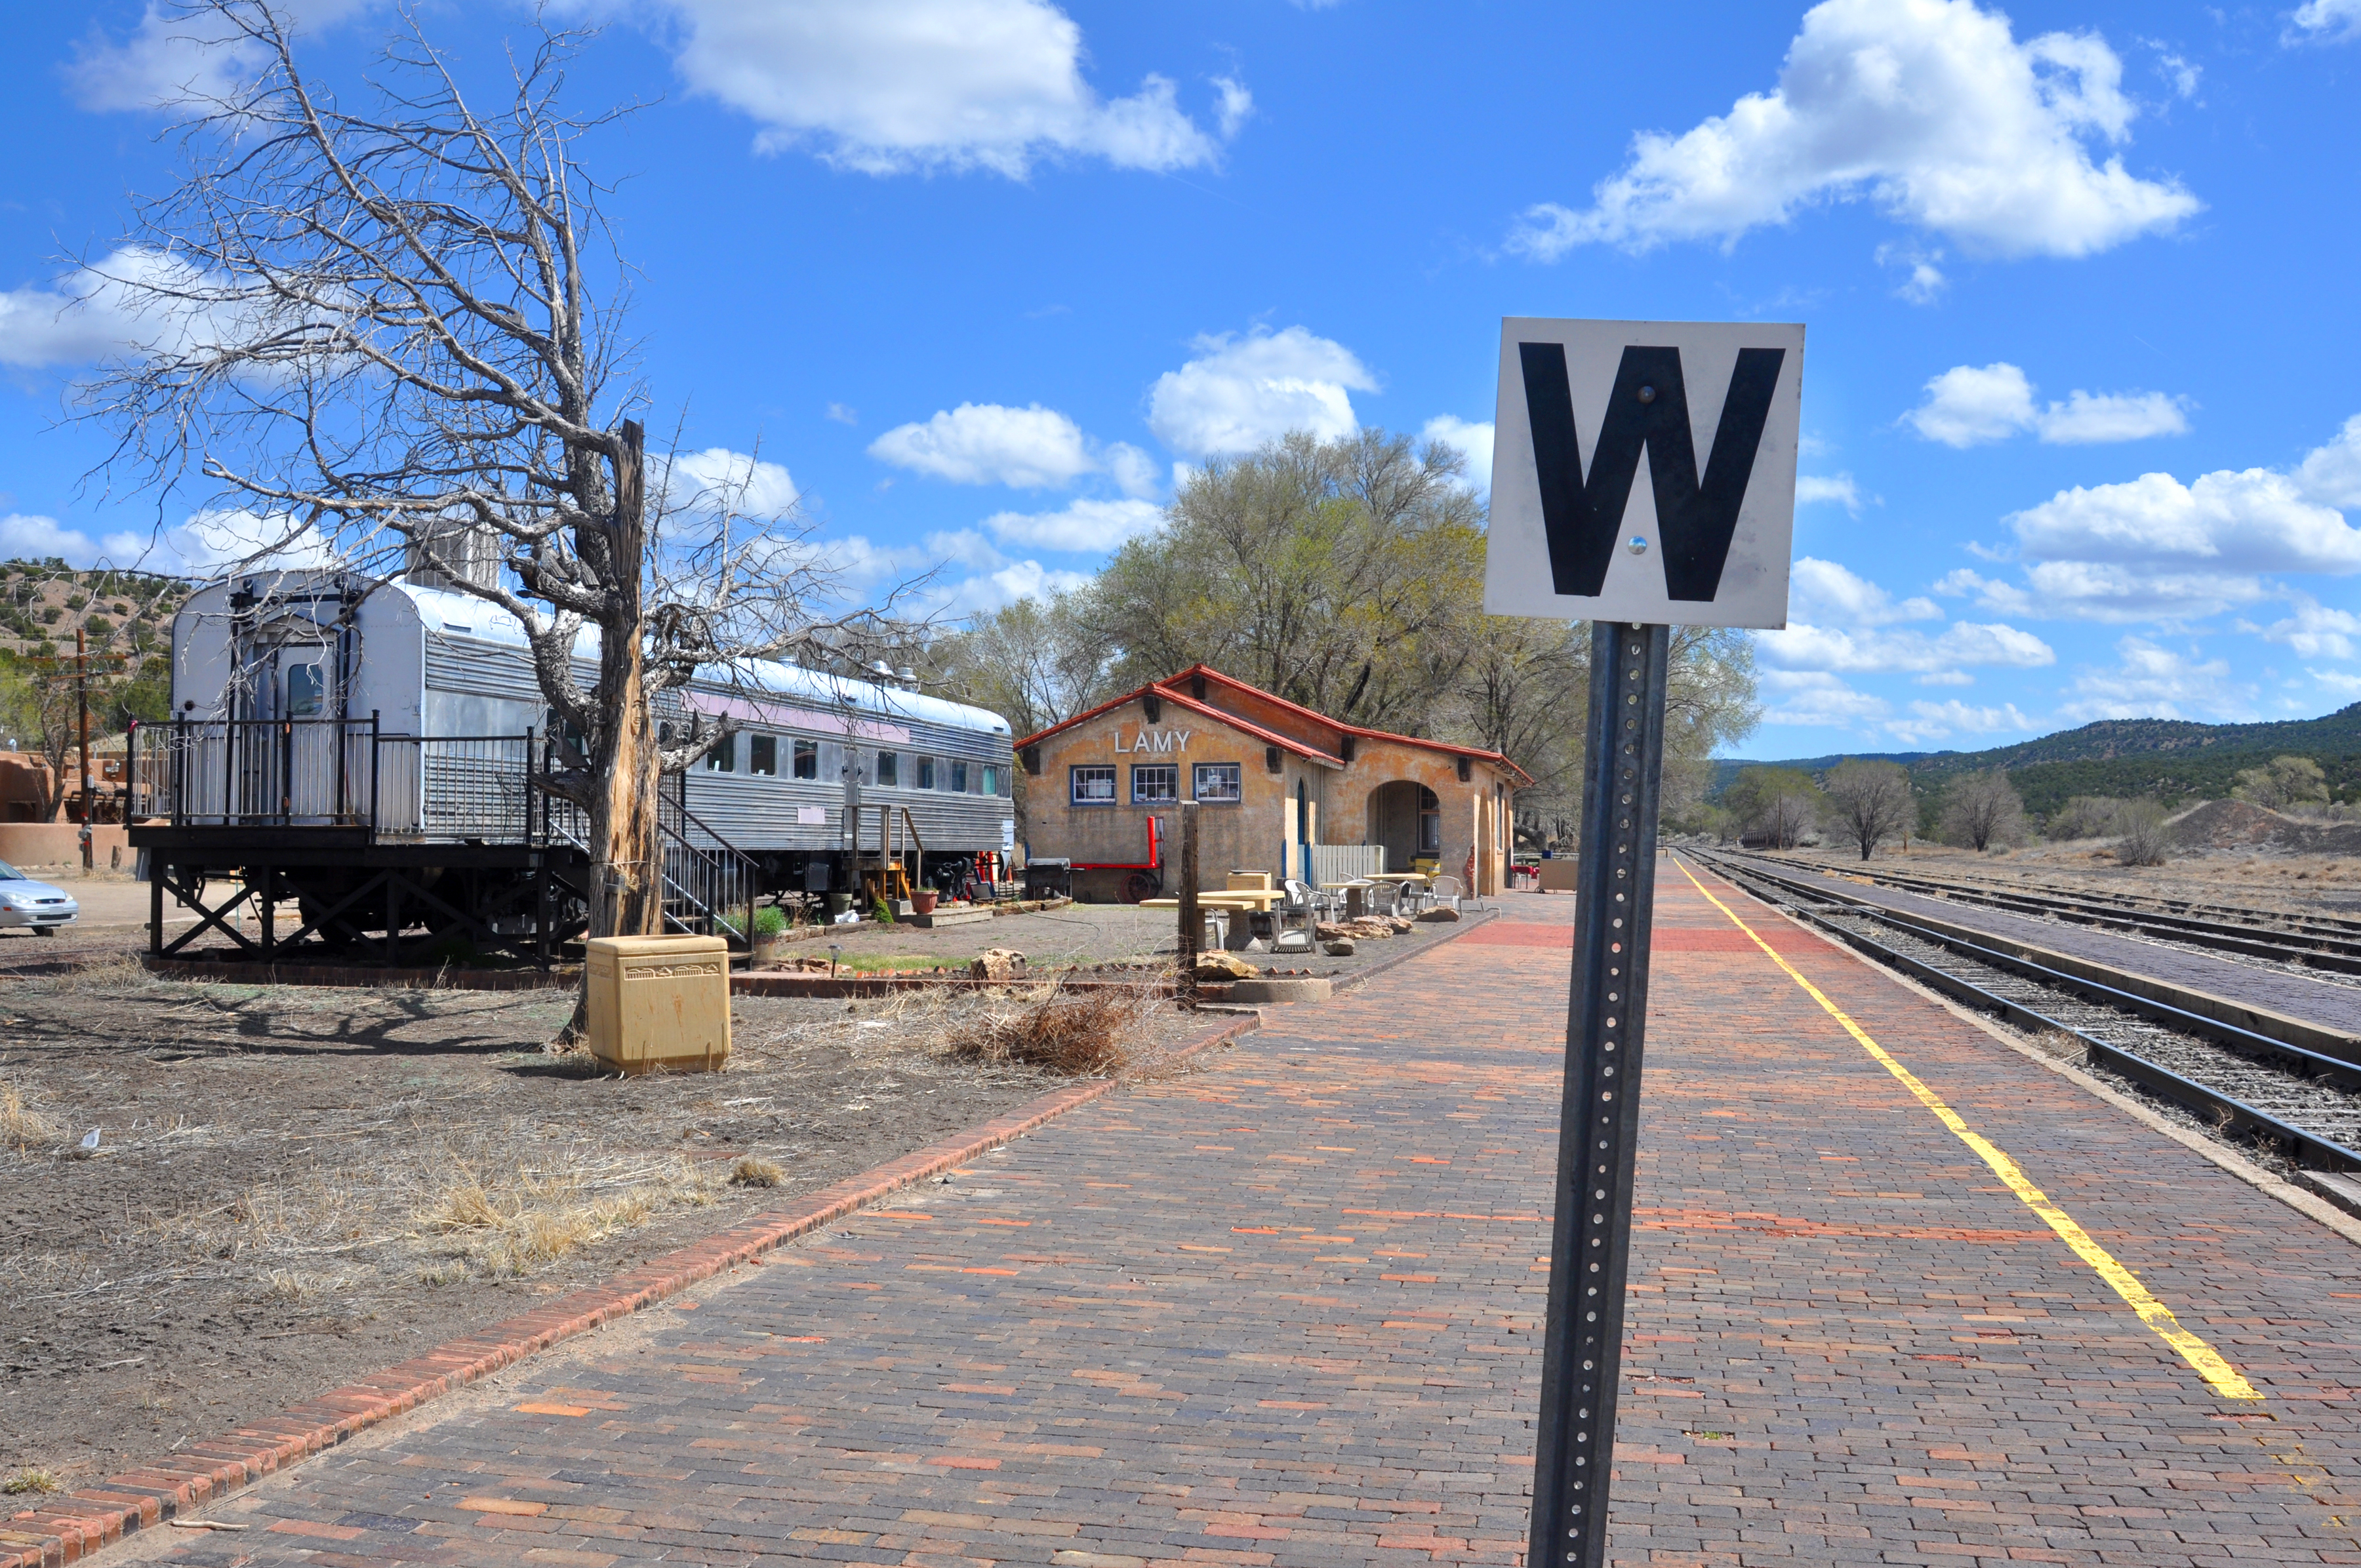 The historic train station in Lamy, New Mexico, serves as a daily stop for Amtrak's Southwest Chief which runs between Los Angeles and Chicago. | Source: Getty Images